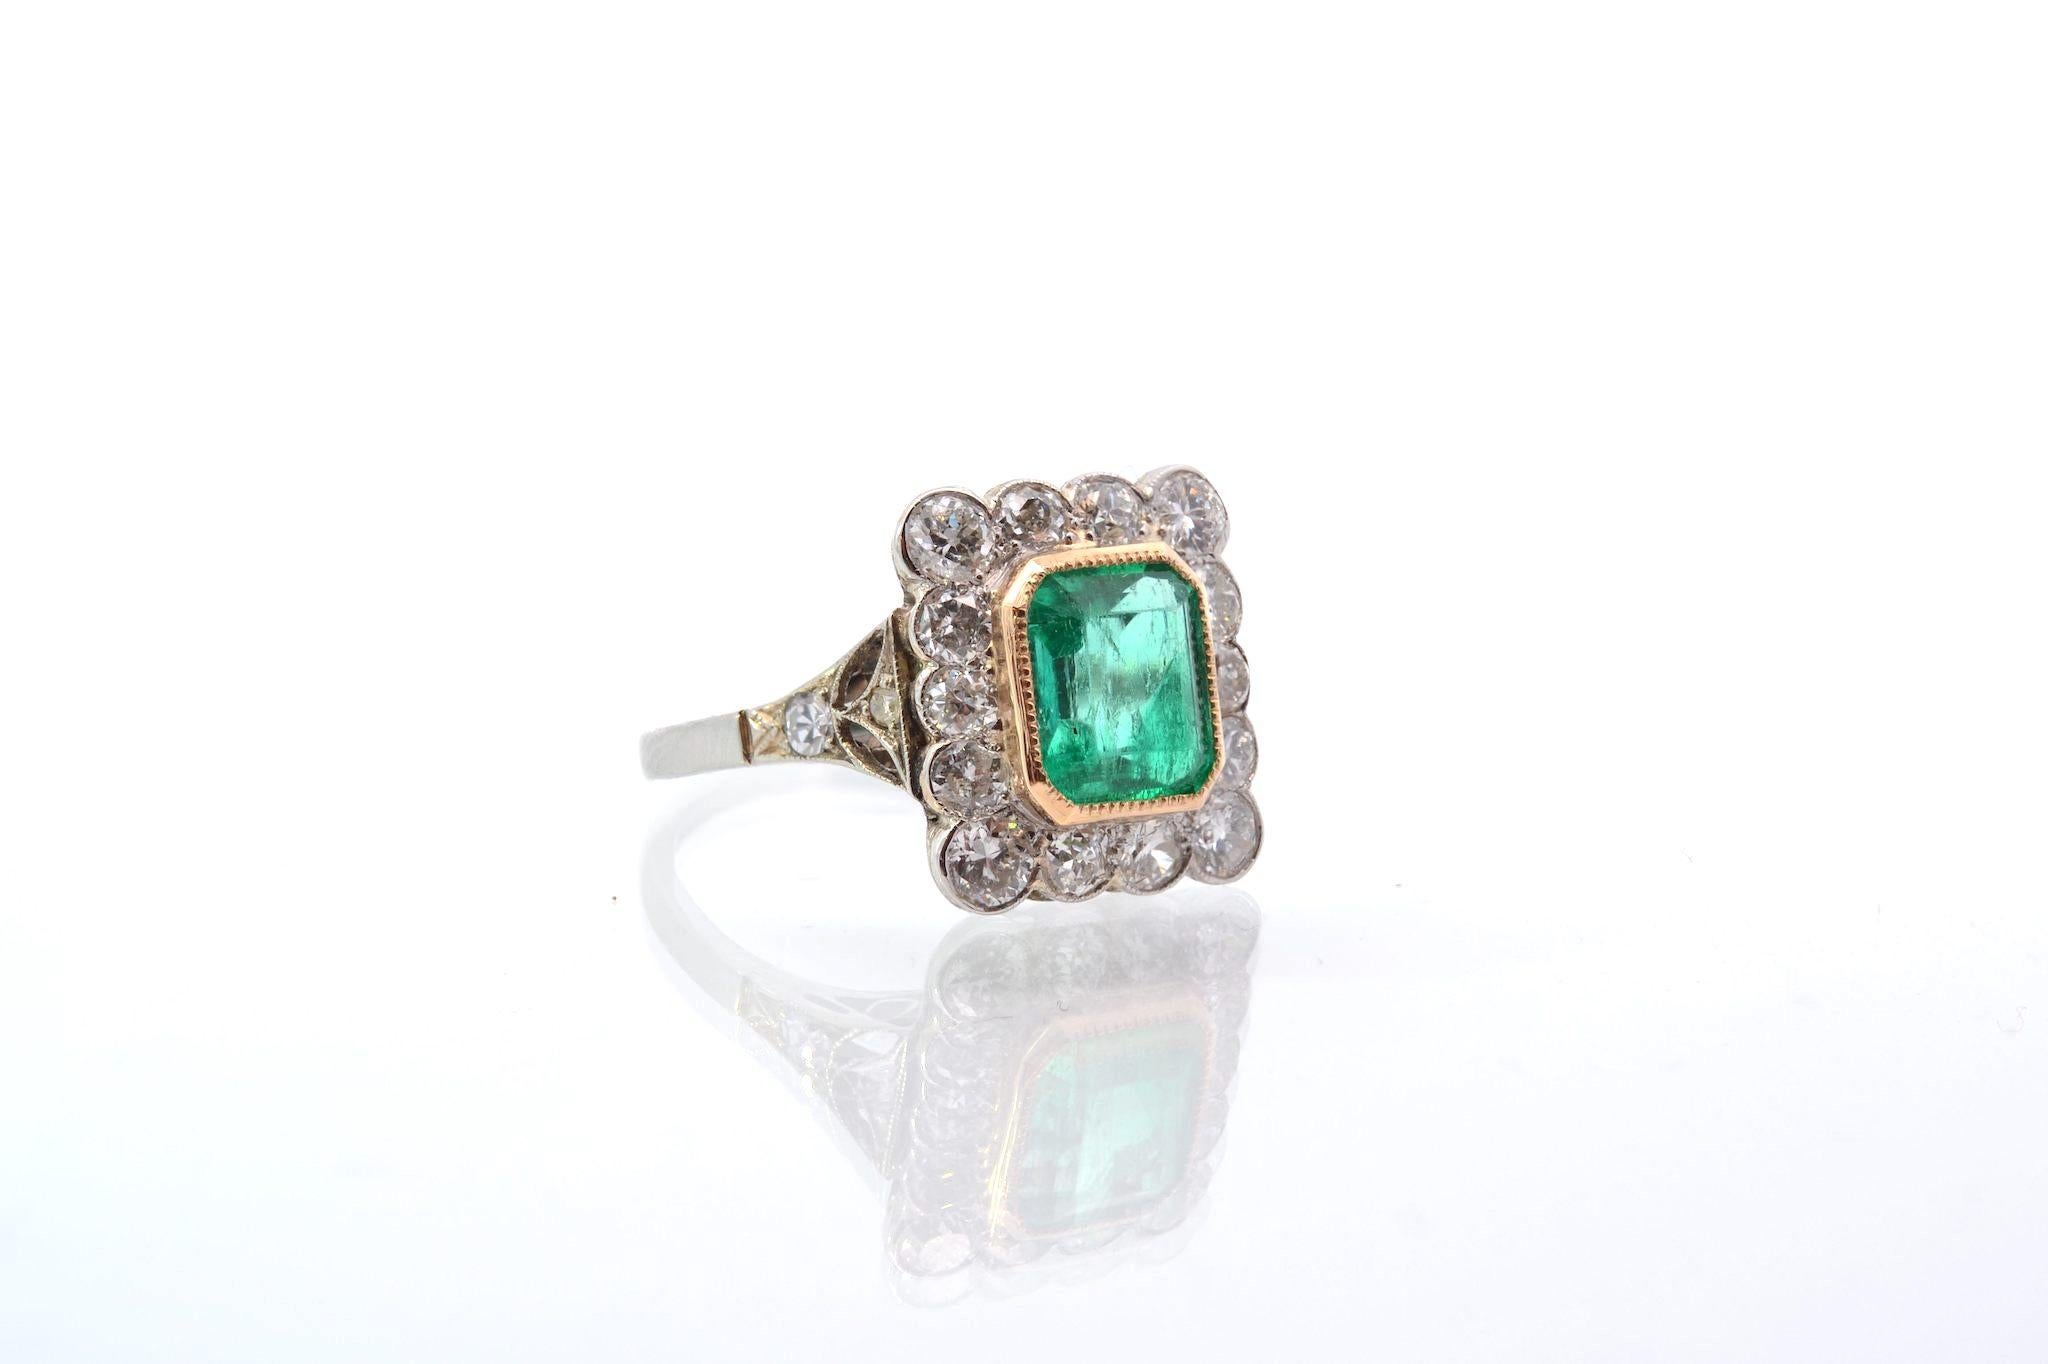 Emerald Cut Colombian emerald and diamonds ring in 18k gold